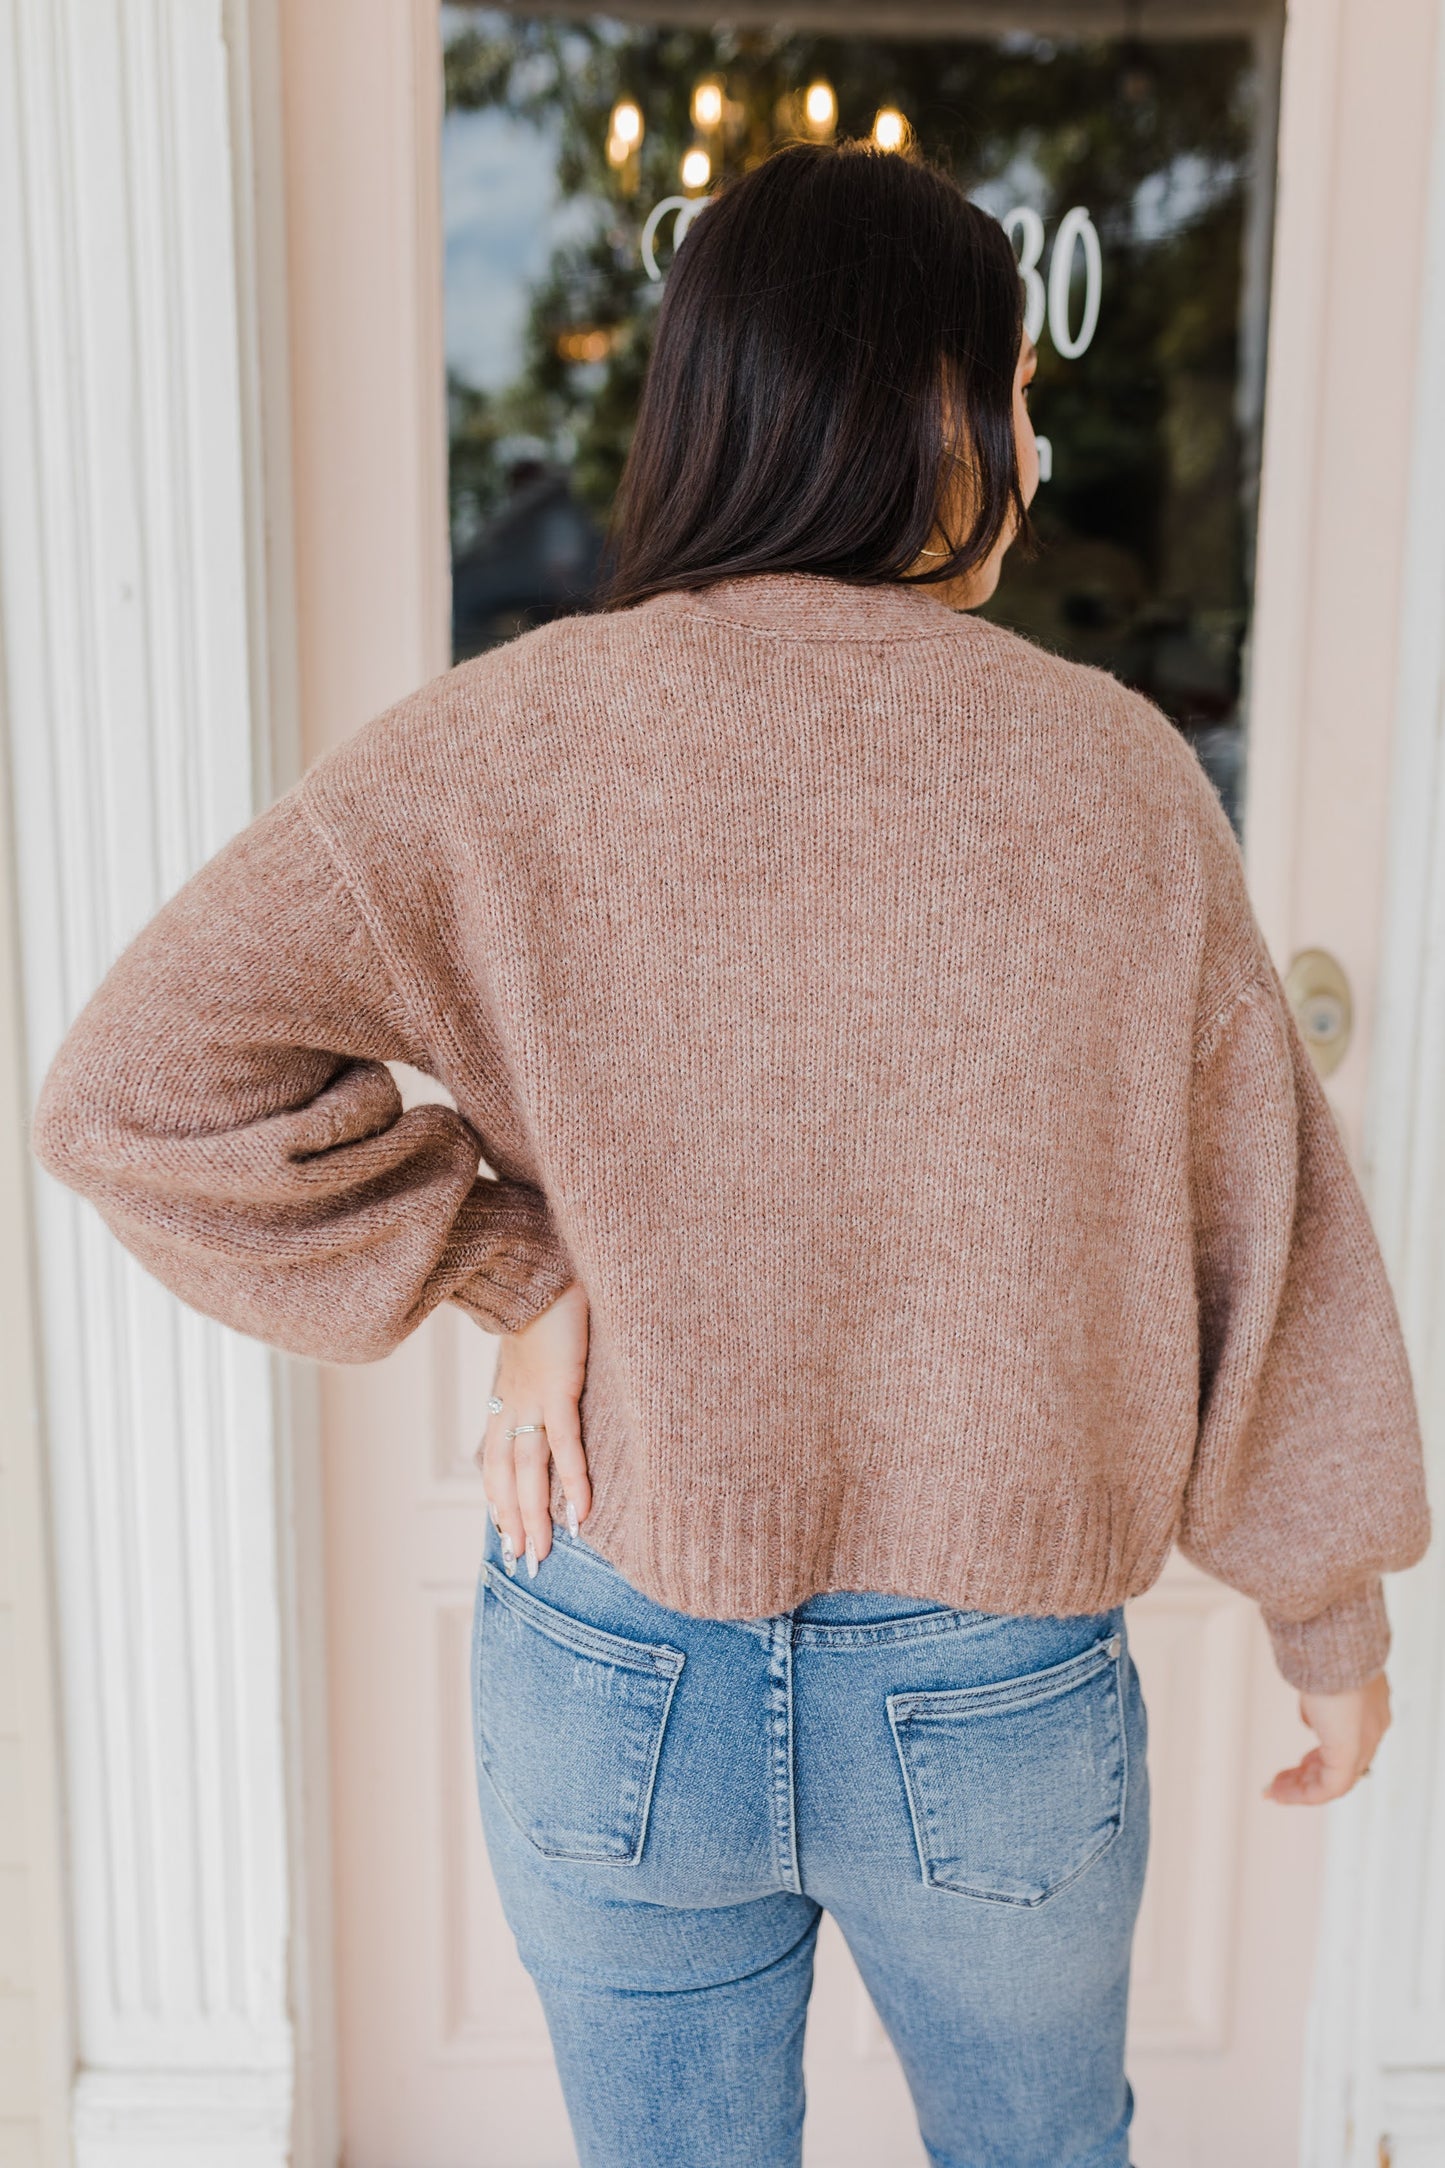 Grab the Cocoa Cozy Knit Cardigan